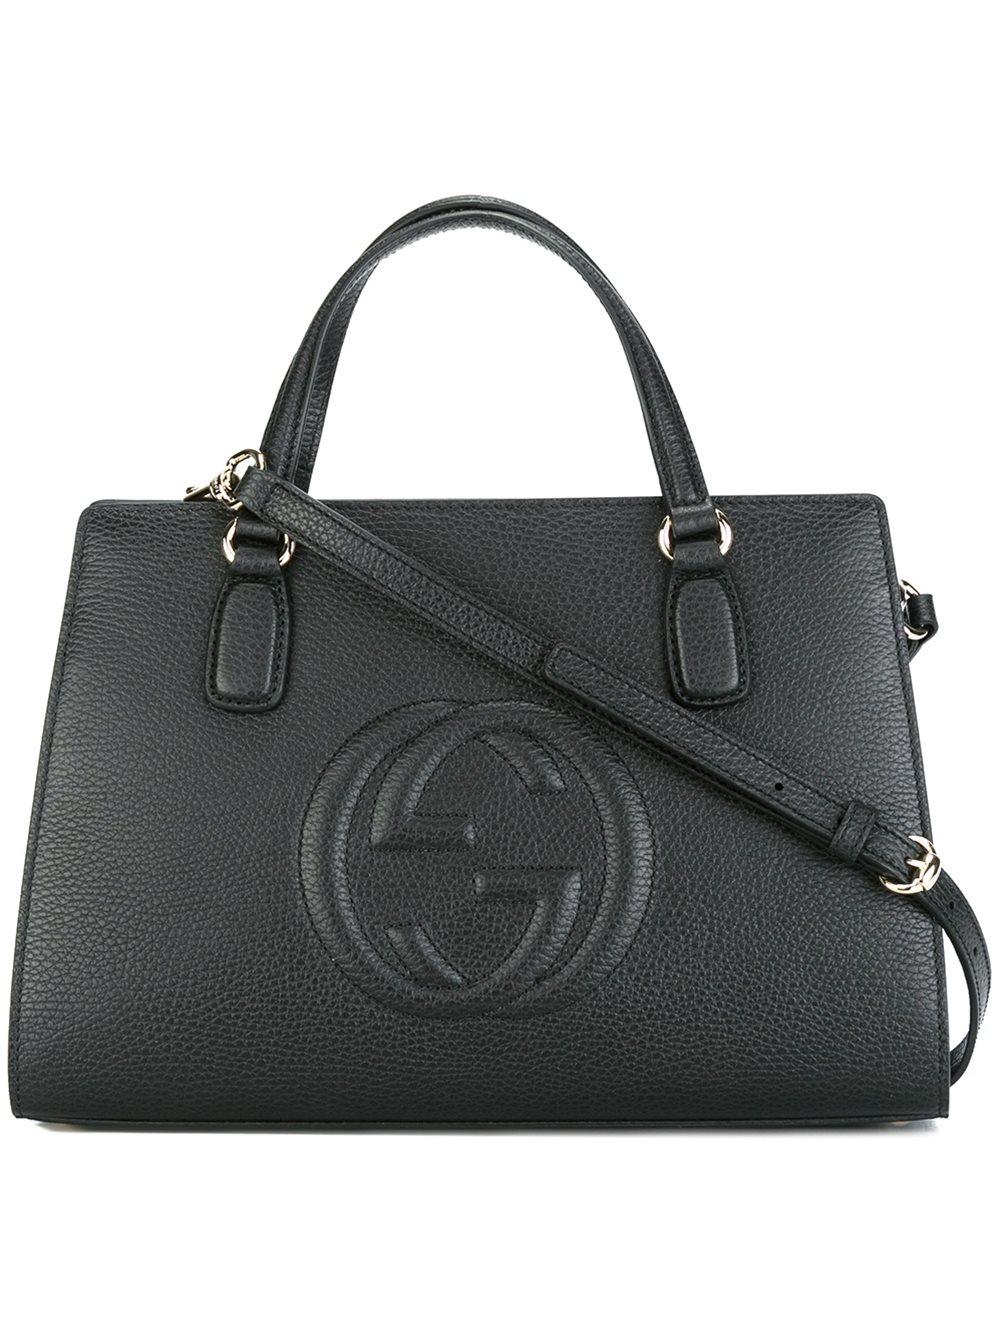 Lyst - Gucci - Embossed Gg Logo Tote Bag - Women - Leather - One Size in Black